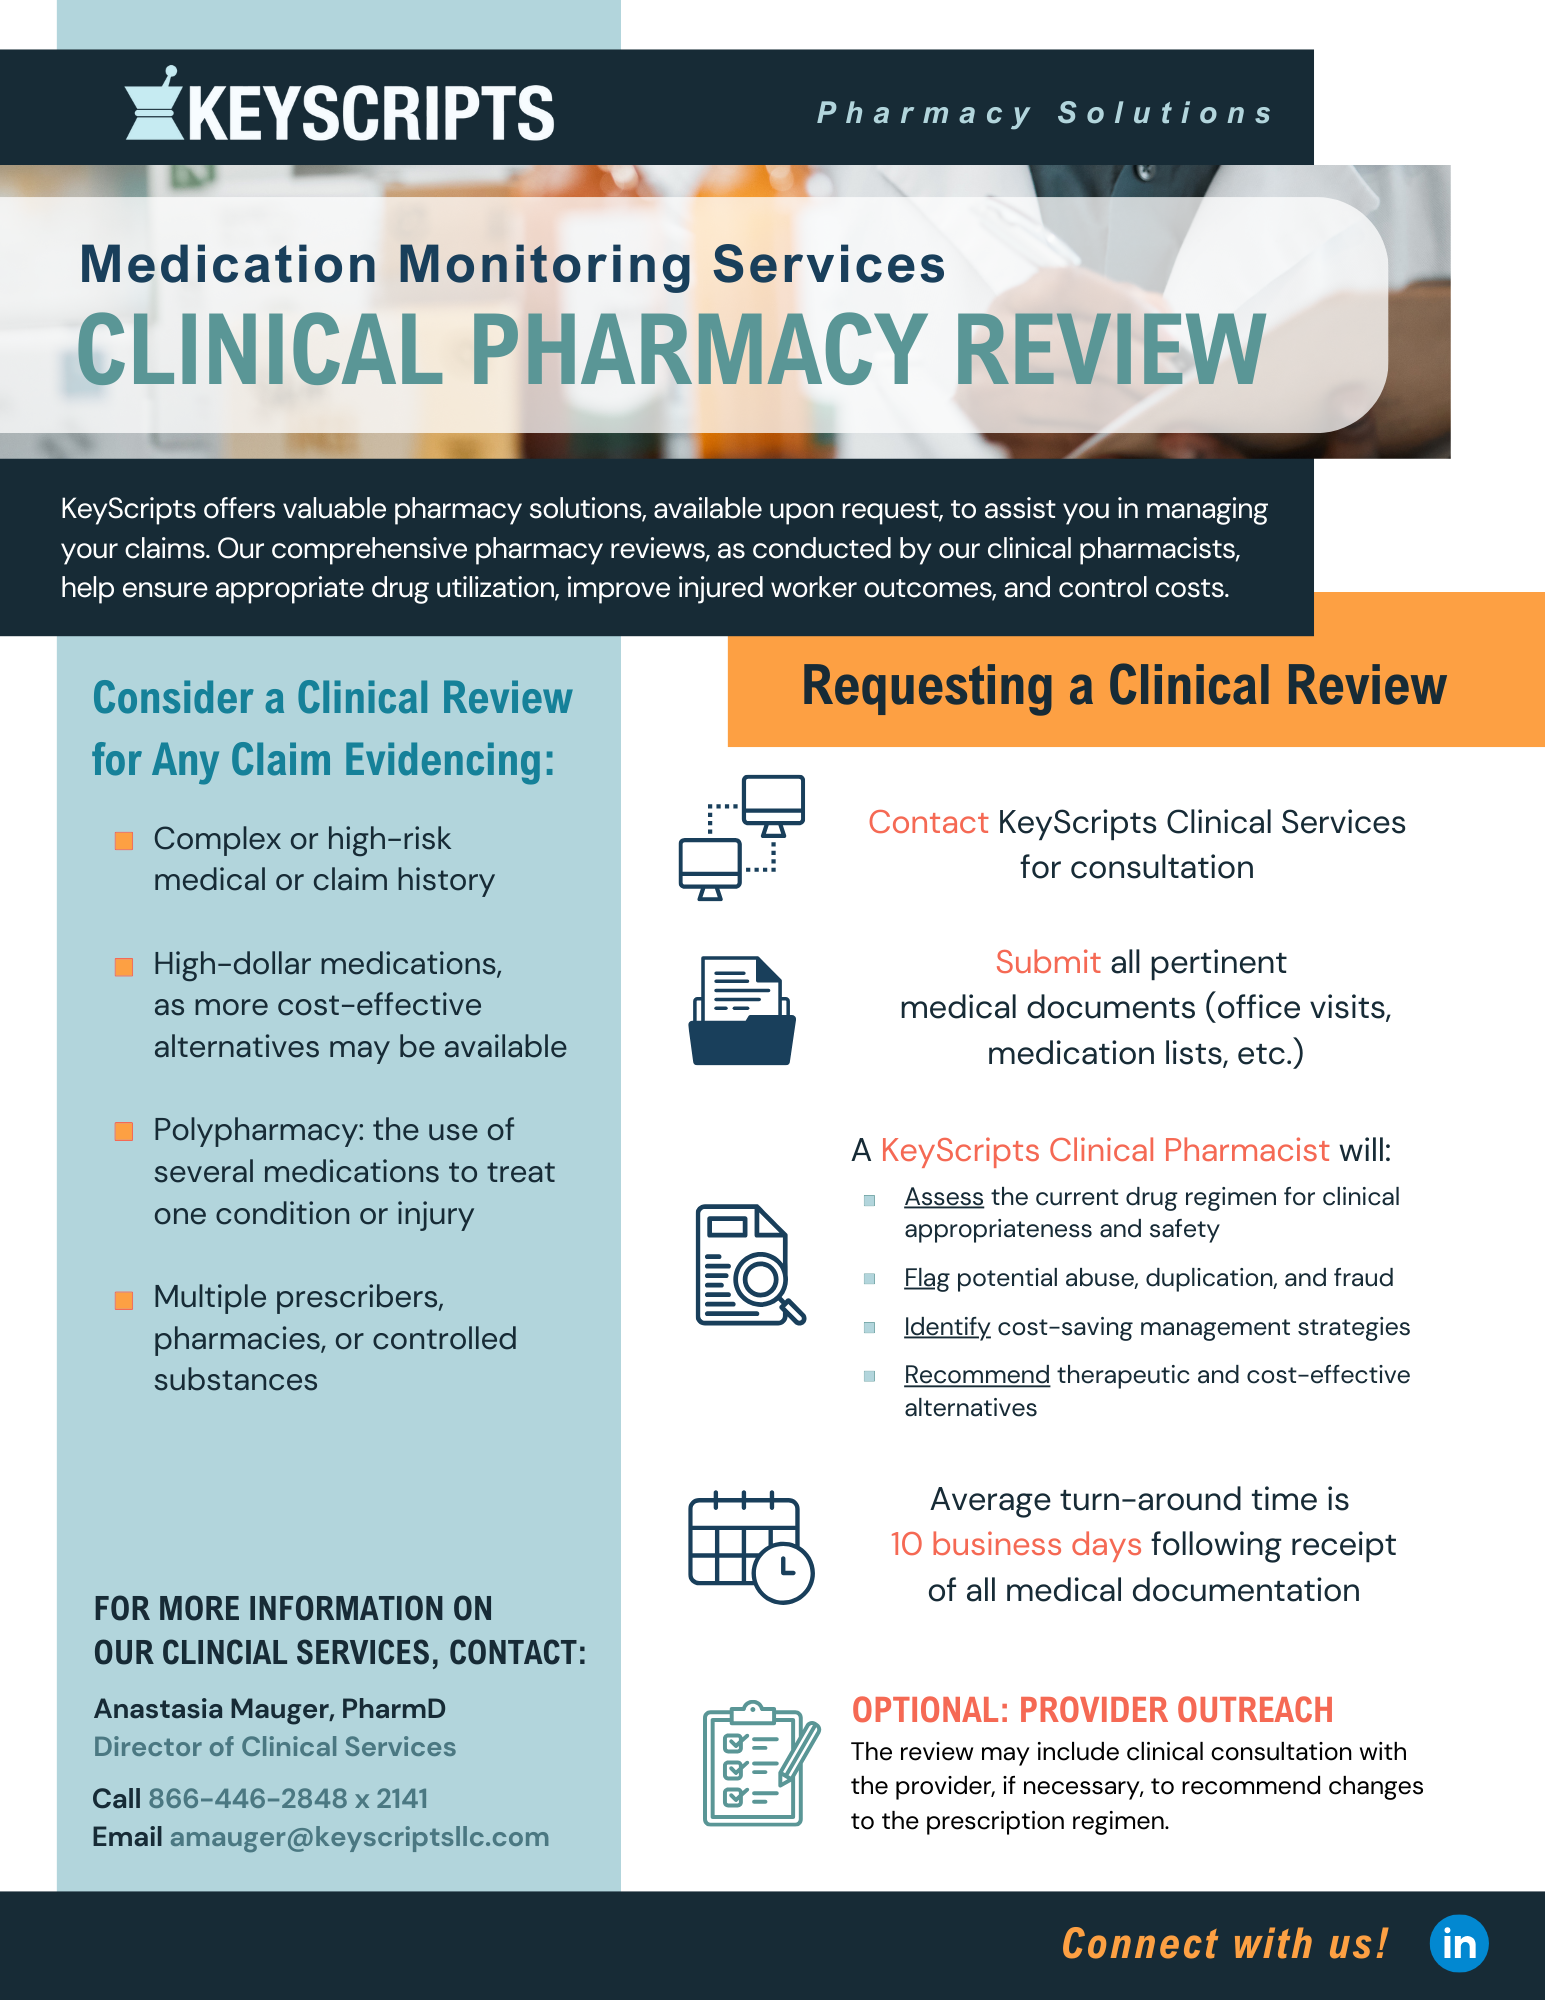 Medication Monitoring: Clinical Pharmacy Review